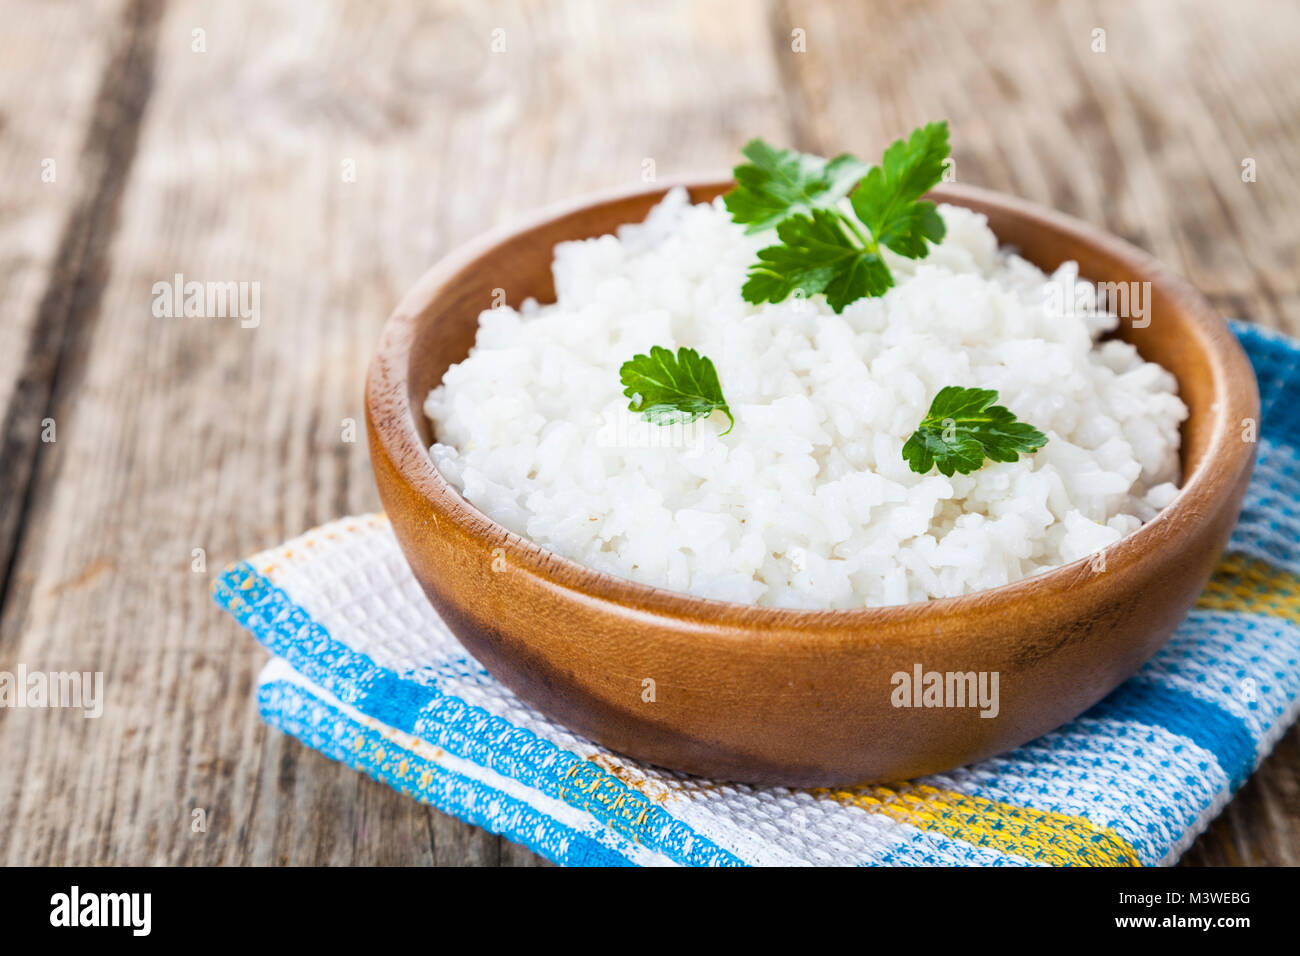 Boiled rice in a wooden bowl on the table. Delicious vegetarian dinner. Stock Photo